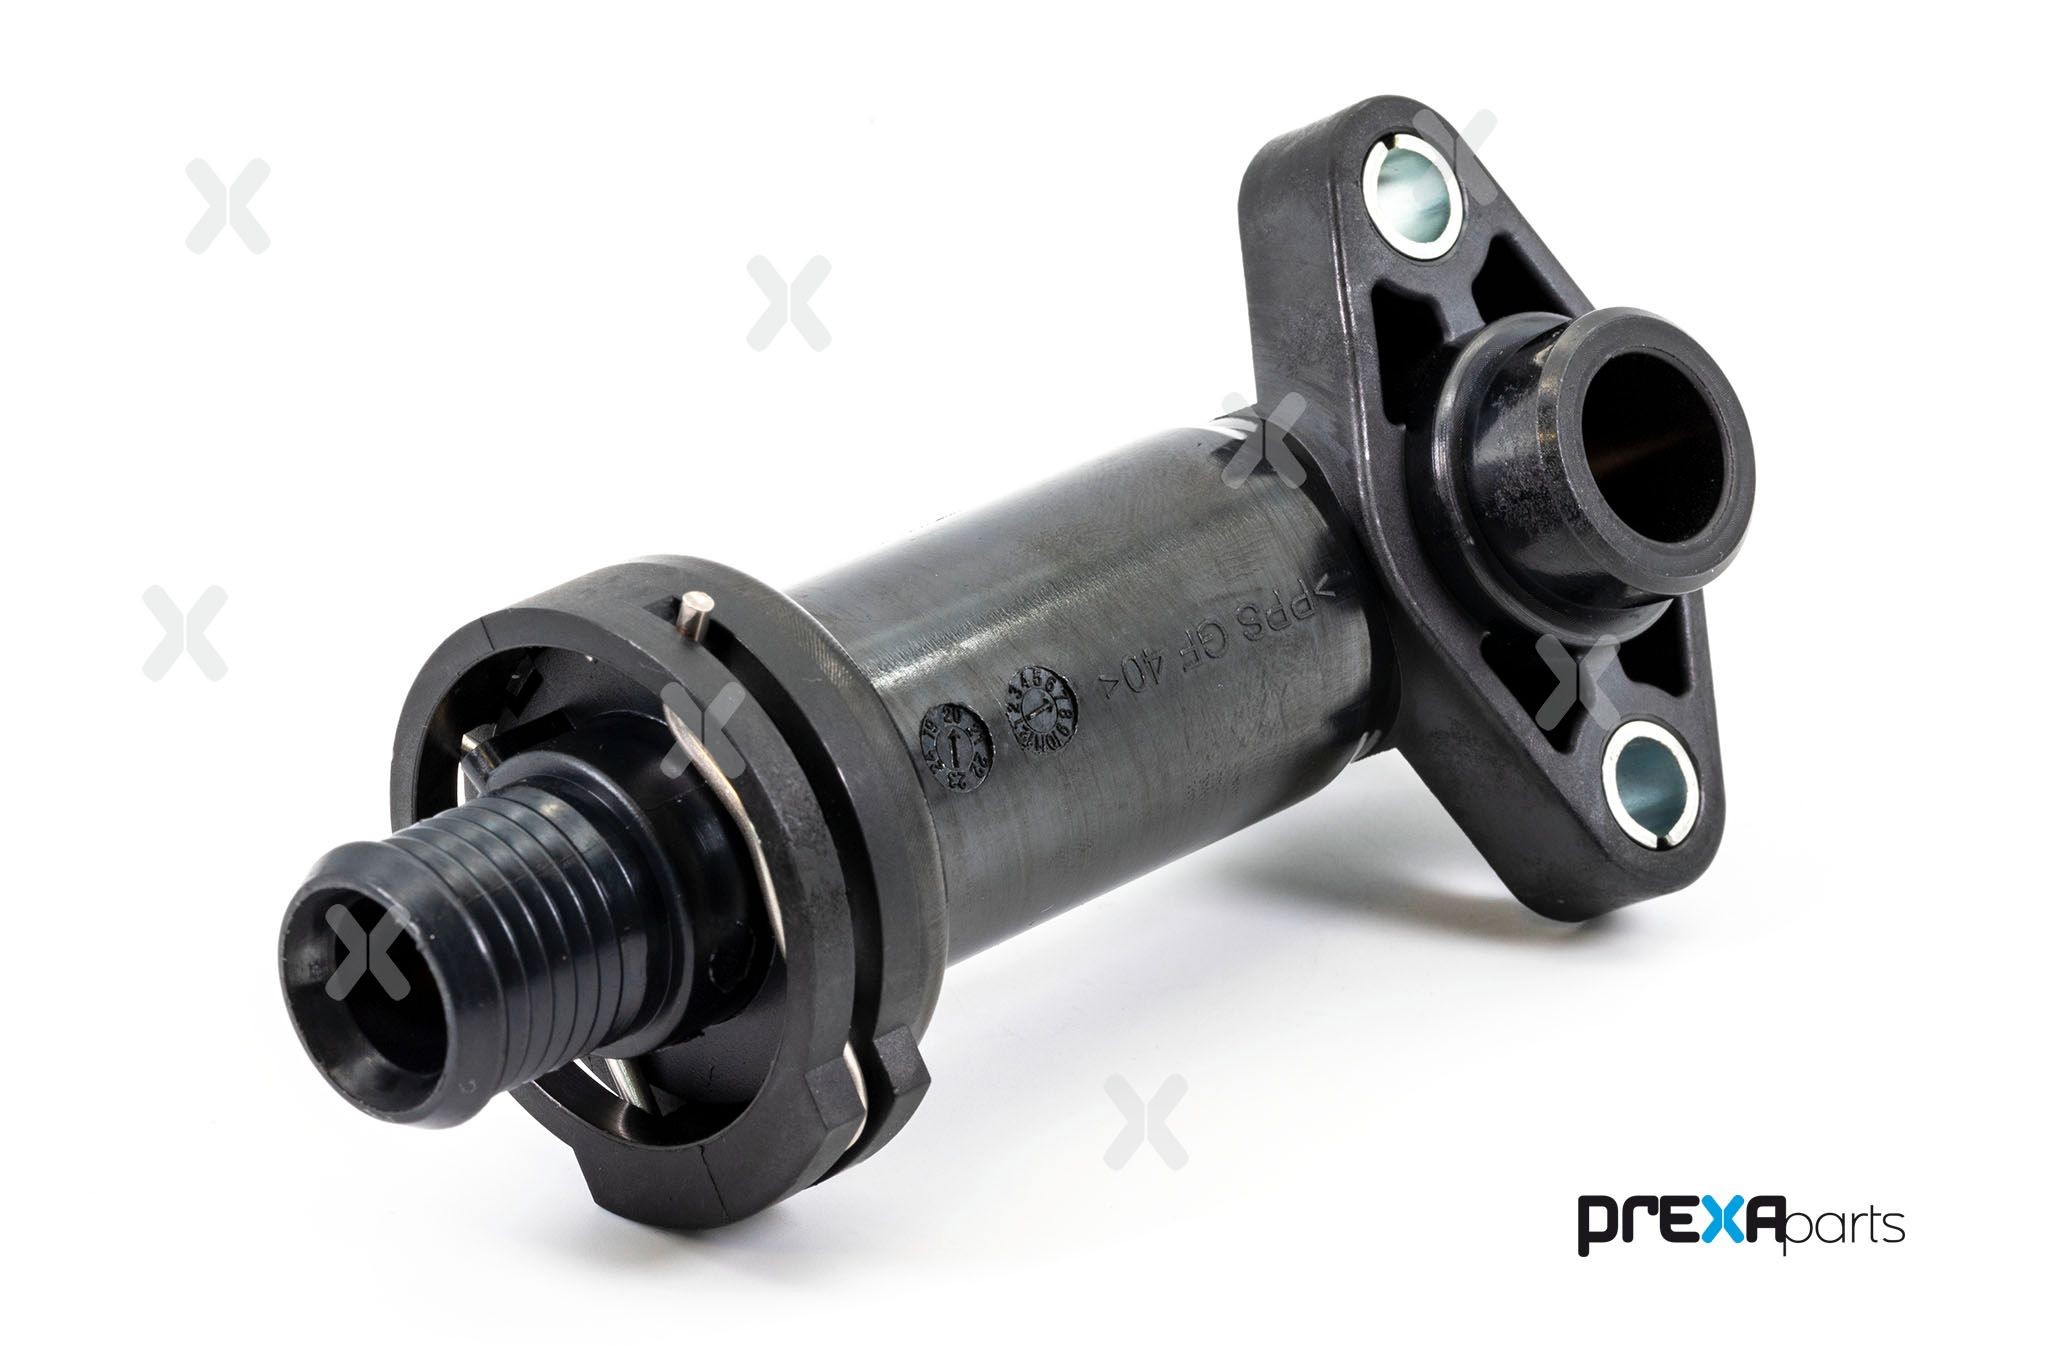 OEM-quality PREXAparts P207012 Thermostat in engine cooling system